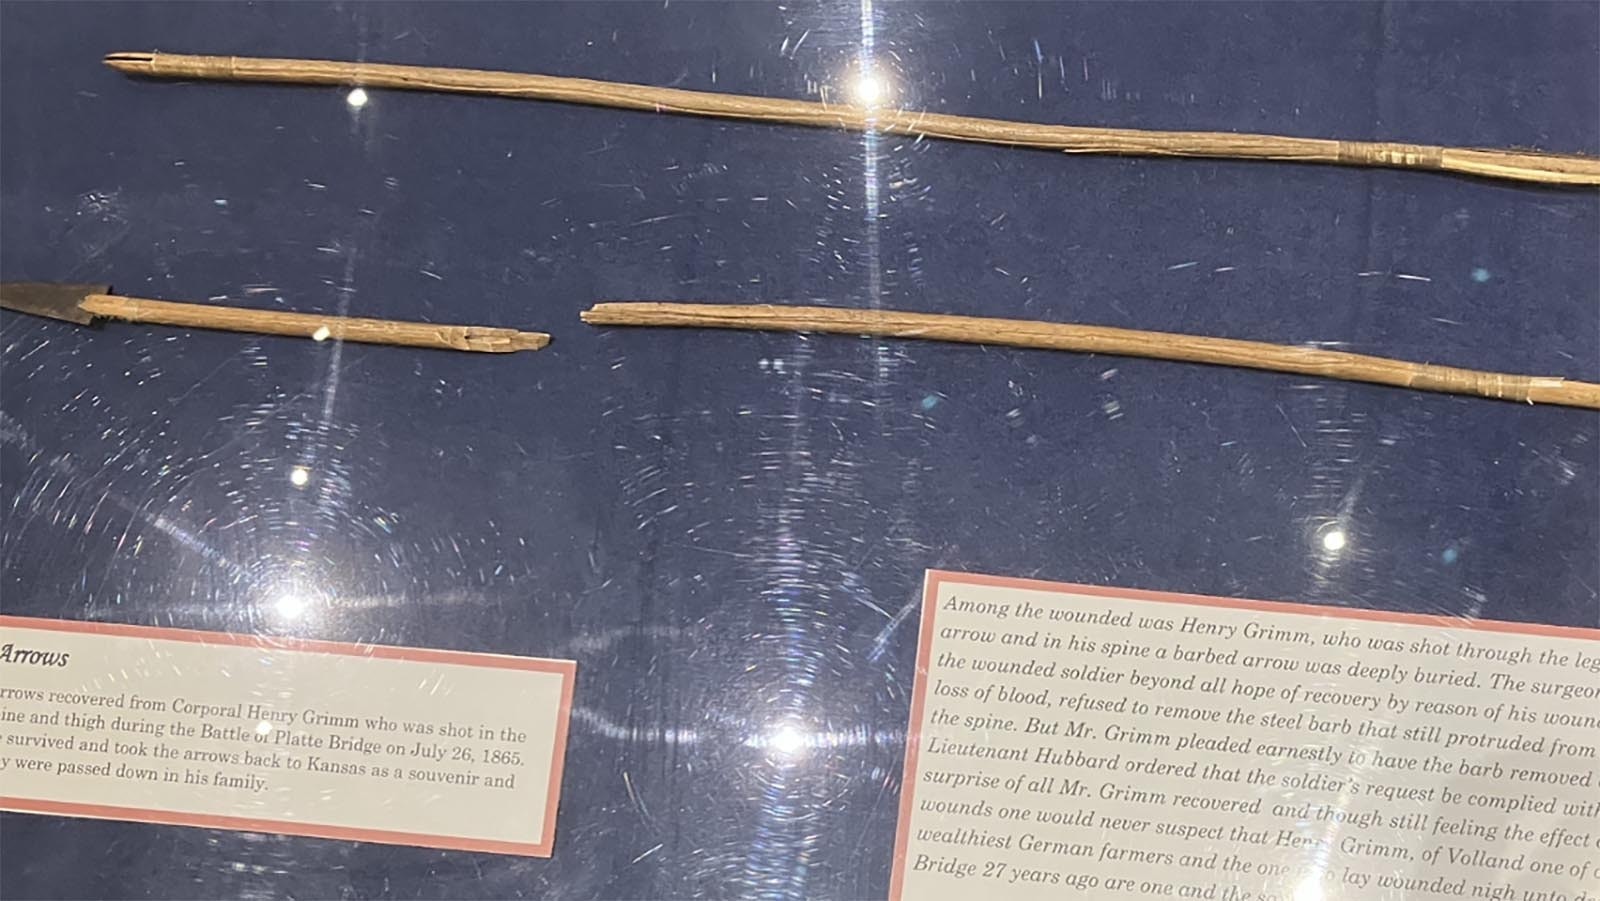 Arrows from 11th Kansas survivor Henry Grimm that are now on loan to the Fort Caspar Museum.